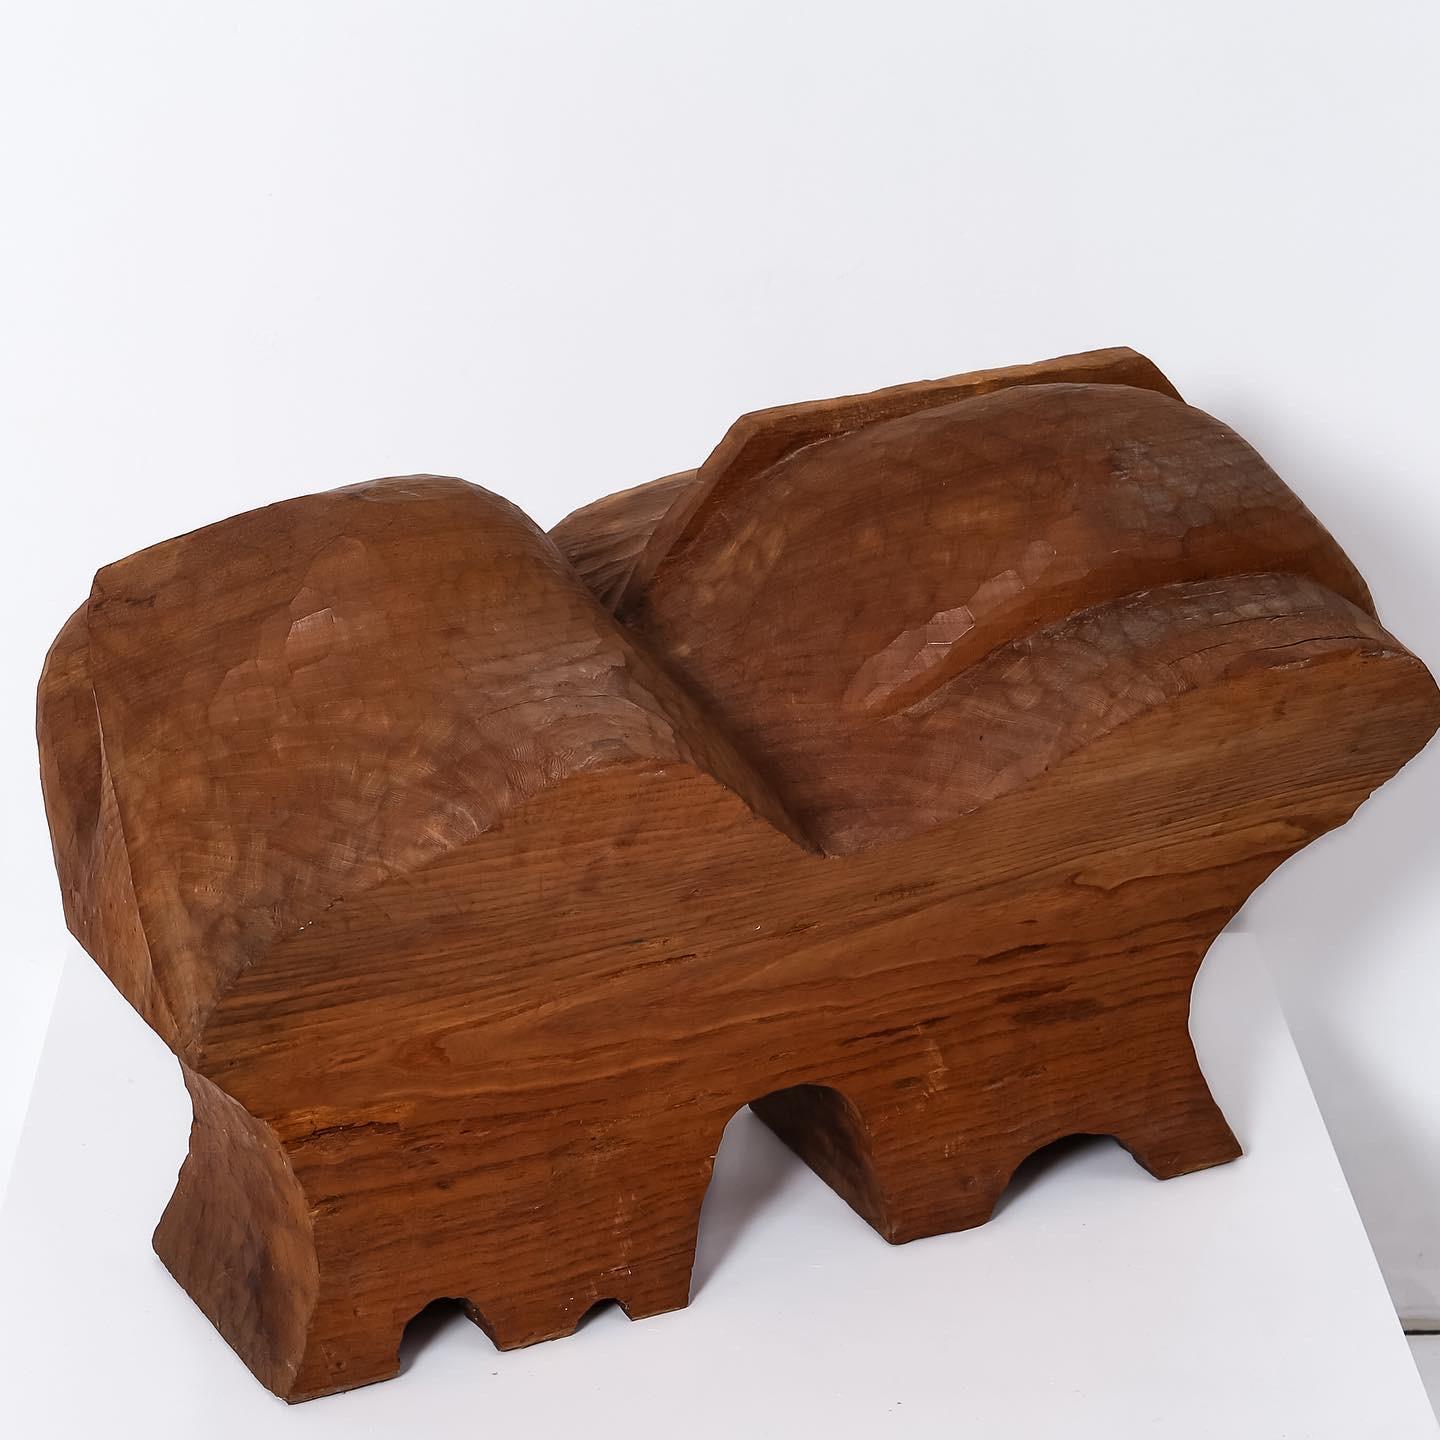 Pacific Northwest woodcarving by Leroy Setziol. Abstract organic form carved of a solid old-growth Chestnut stump. Signature in the form of the initials LS at side. Acquired from private collector and fellow woodworker. The piece is substantial and